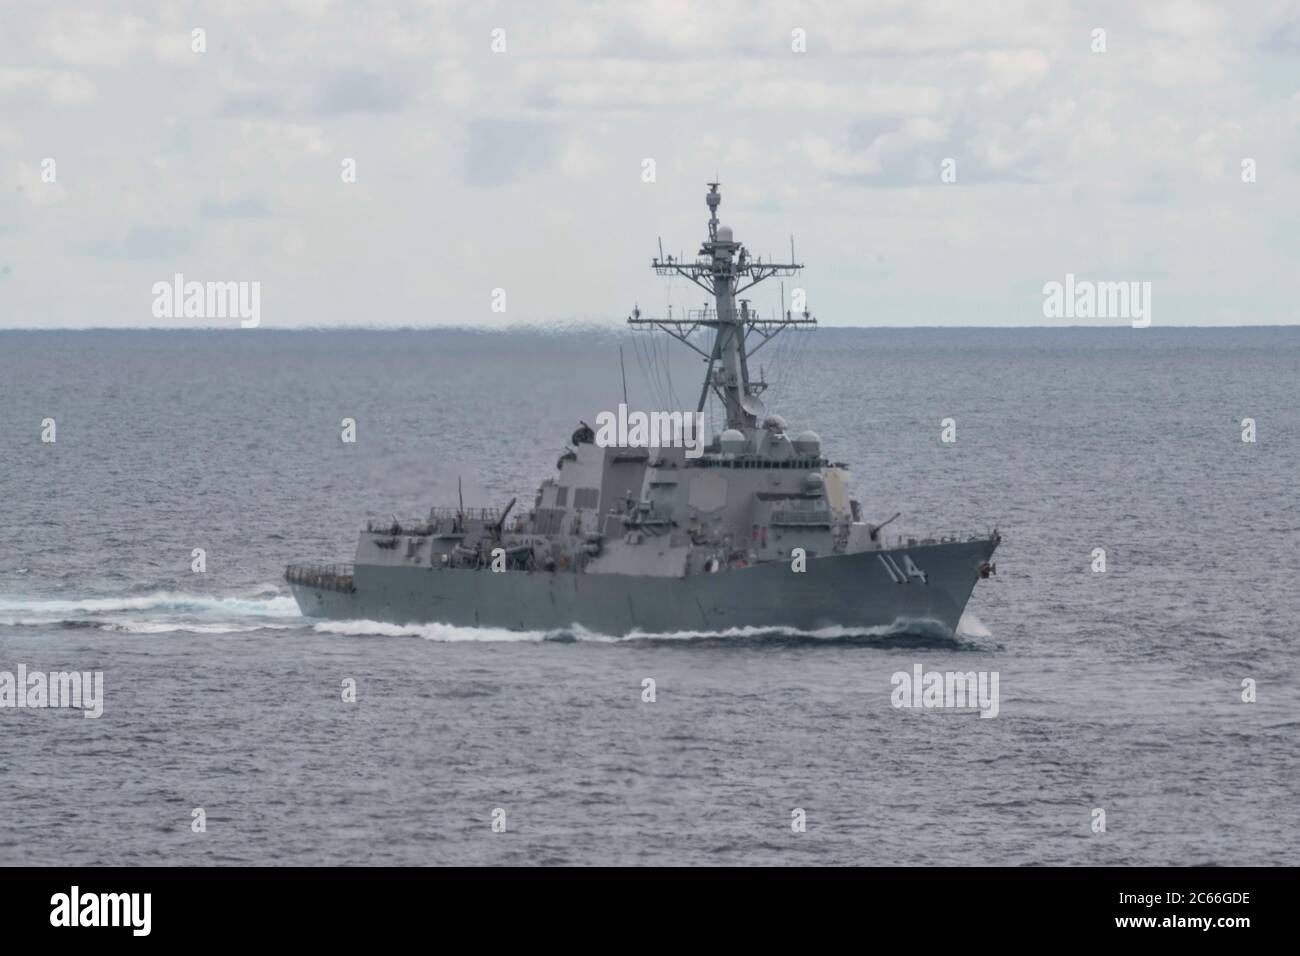 The U.S. Navy Arleigh Burke-class guided missile destroyer USS Ralph Johnson sails in formation during dual-carrier operations July 6, 2020 in the South China Sea. Stock Photo